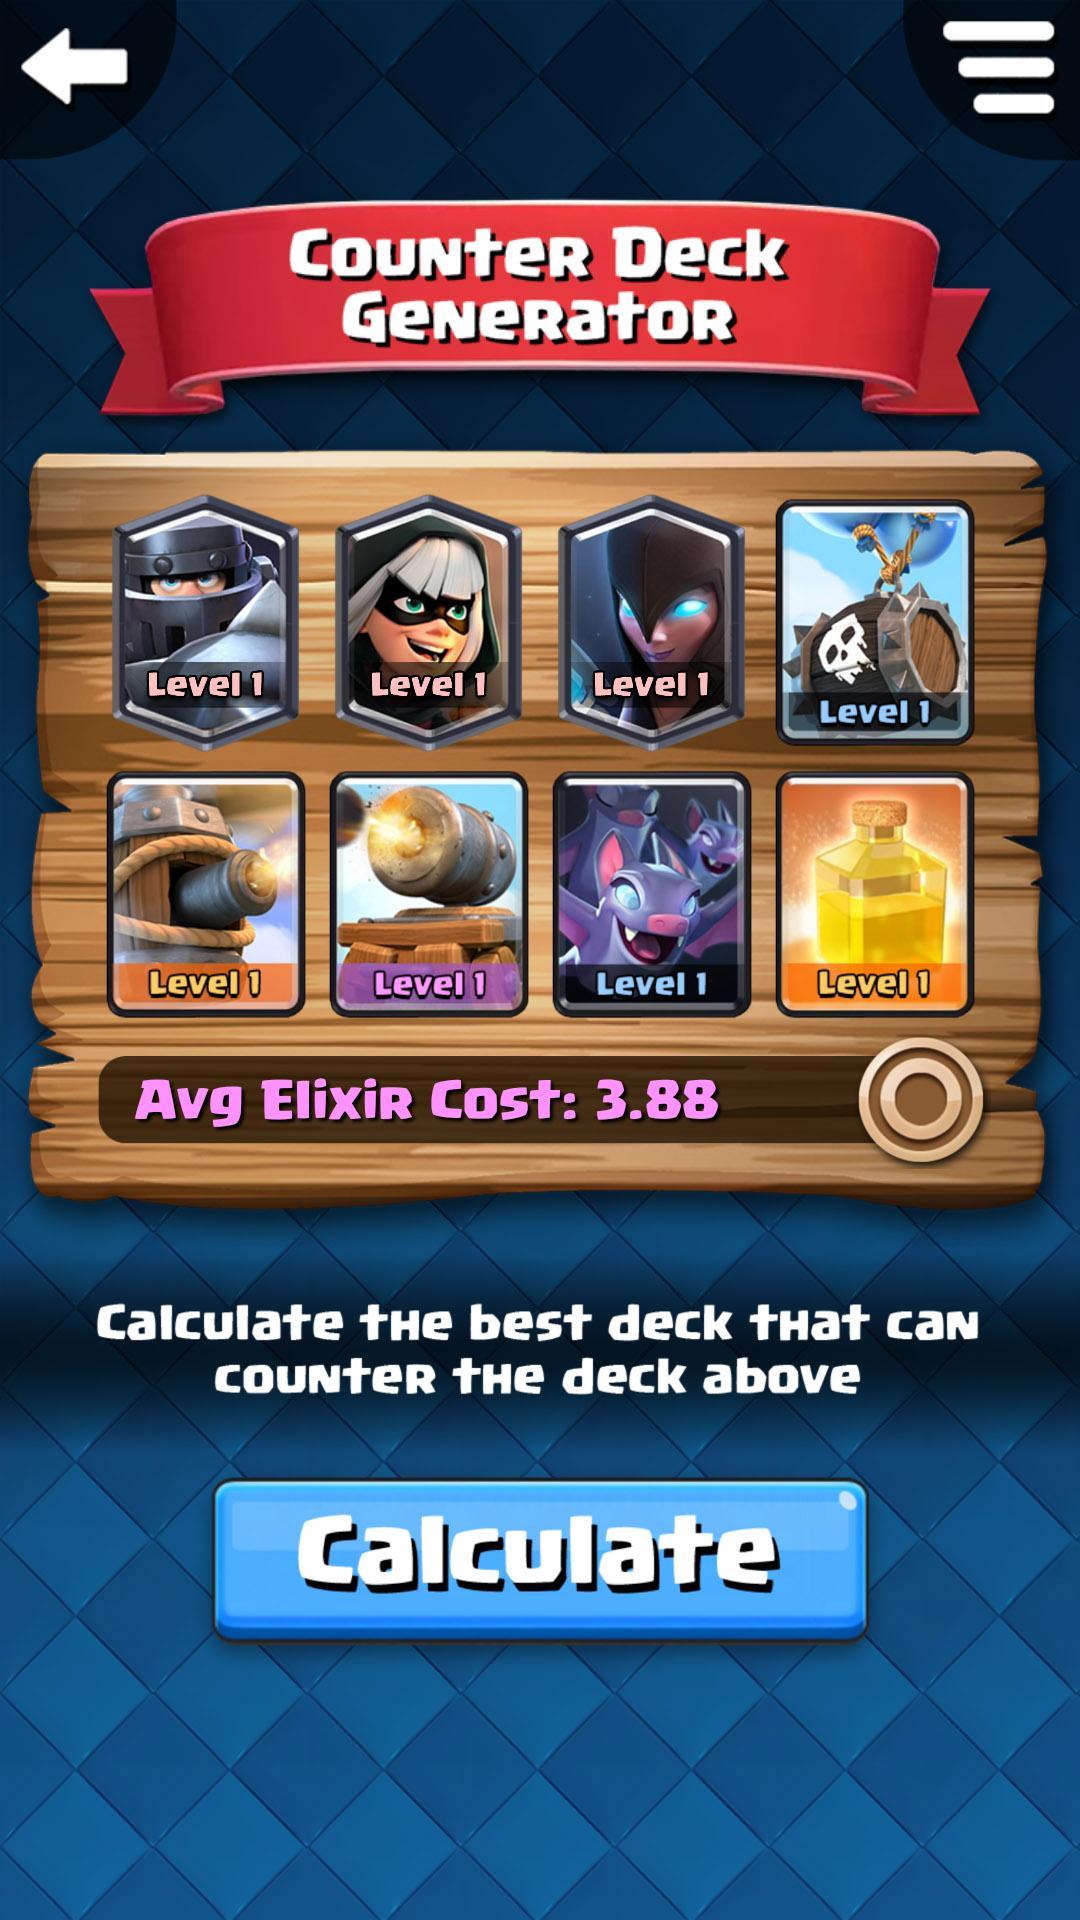 Counter Deck Generator for Clash Royale for Android - APK Download